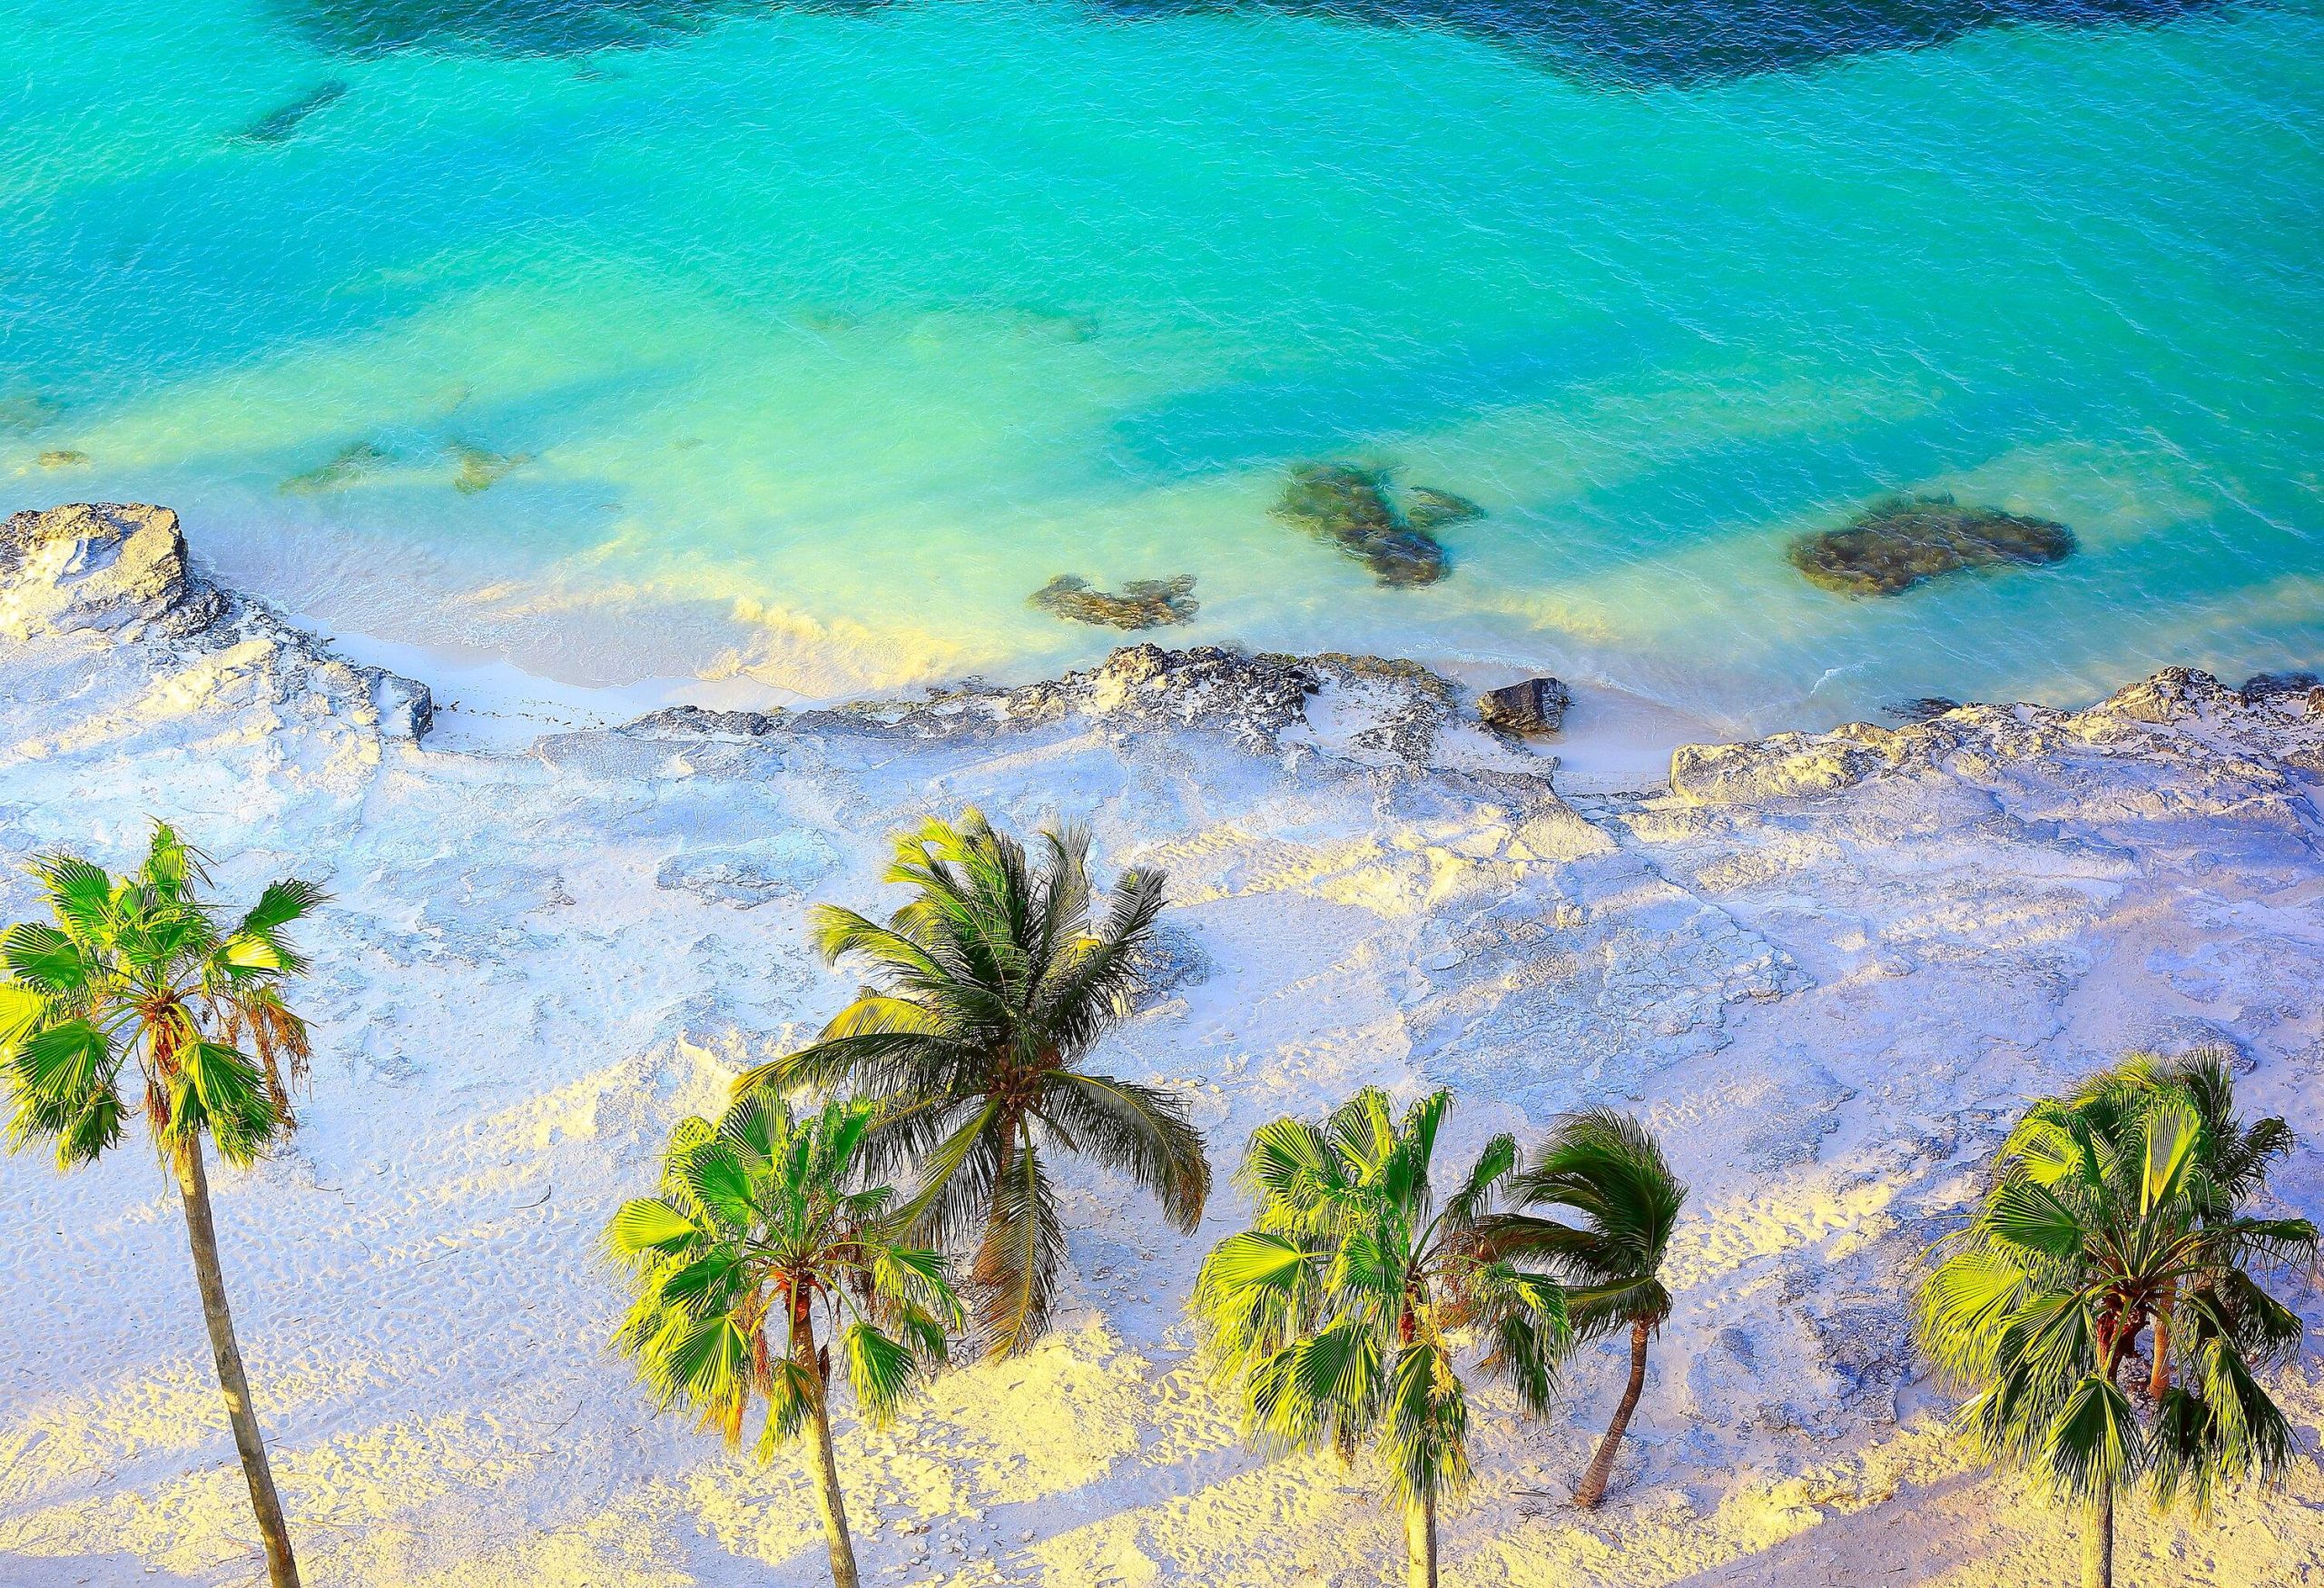 Tall, swaying palm trees line a pristine white-sand beach, where gentle turquoise waves meet a rugged, rocky coastline.